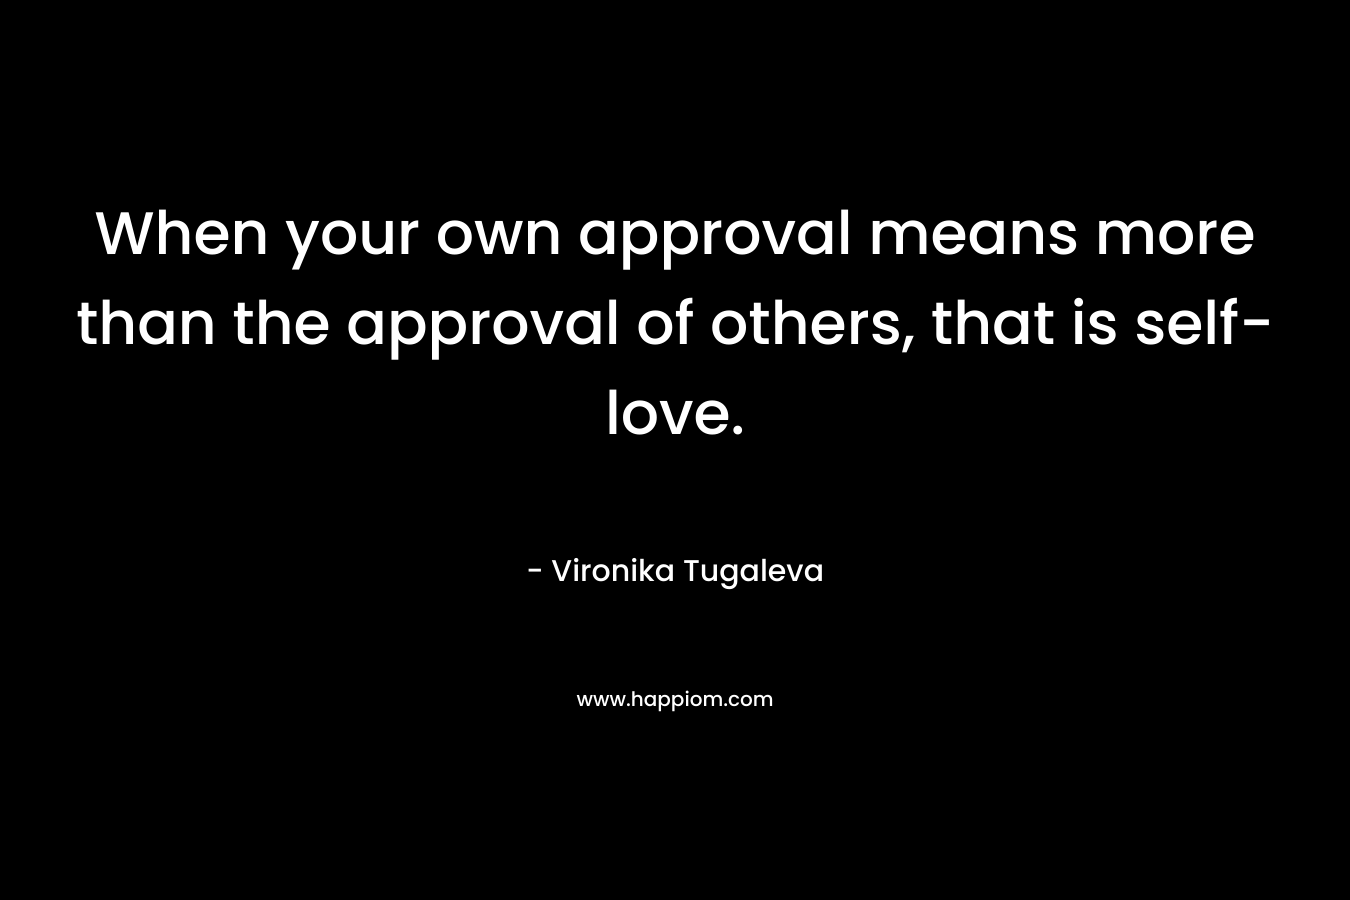 When your own approval means more than the approval of others, that is self-love.